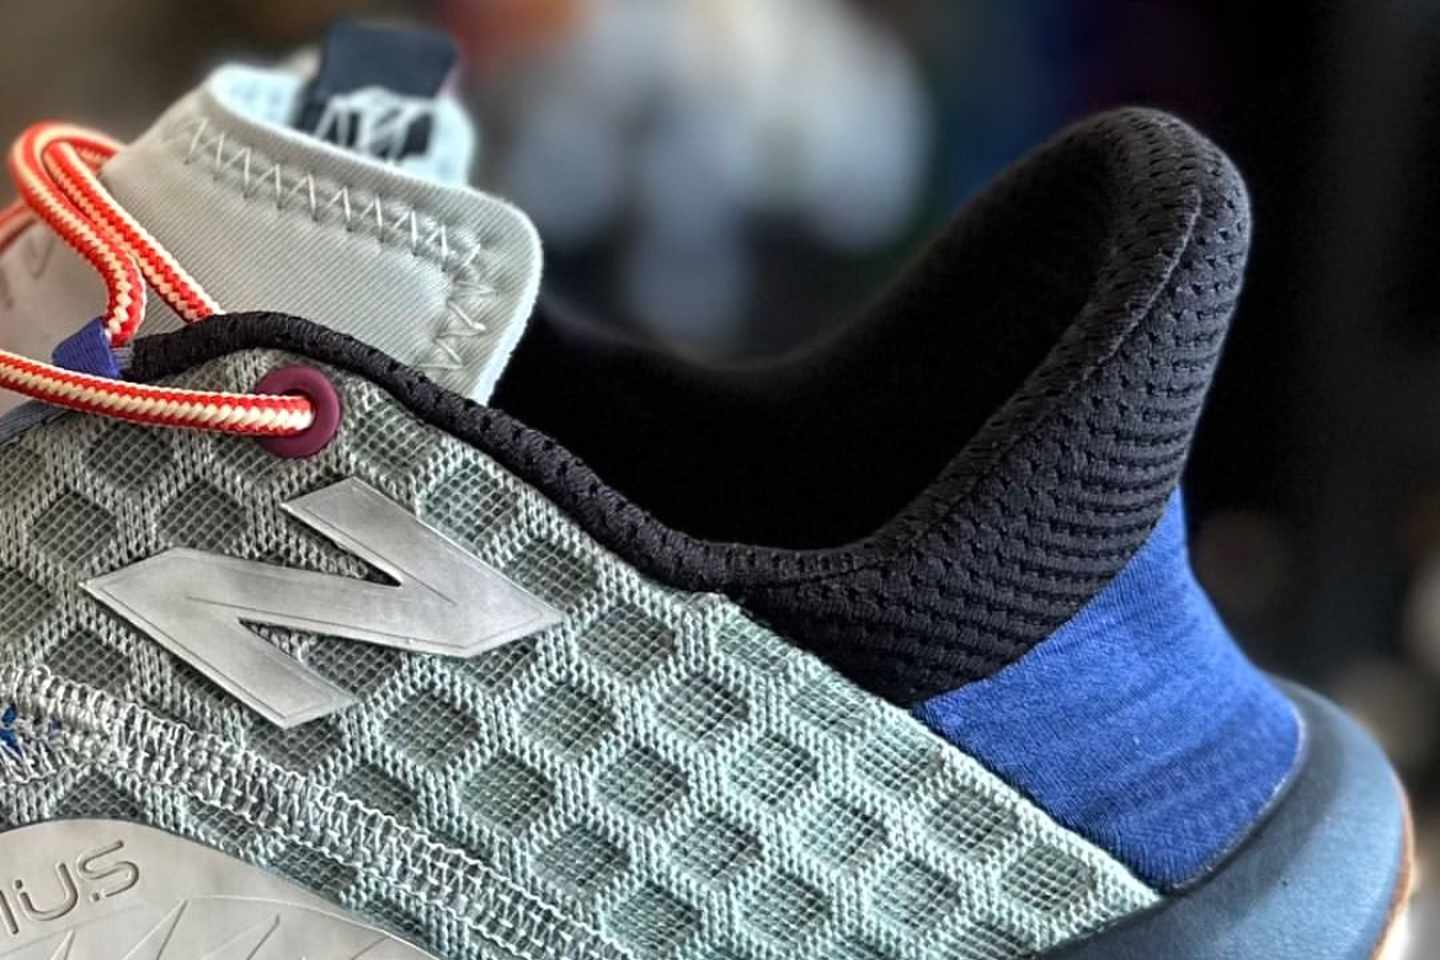 Action Bronson's New Balance Minimus Trail 2024 sneaker collab in grey, purple, and green colorway